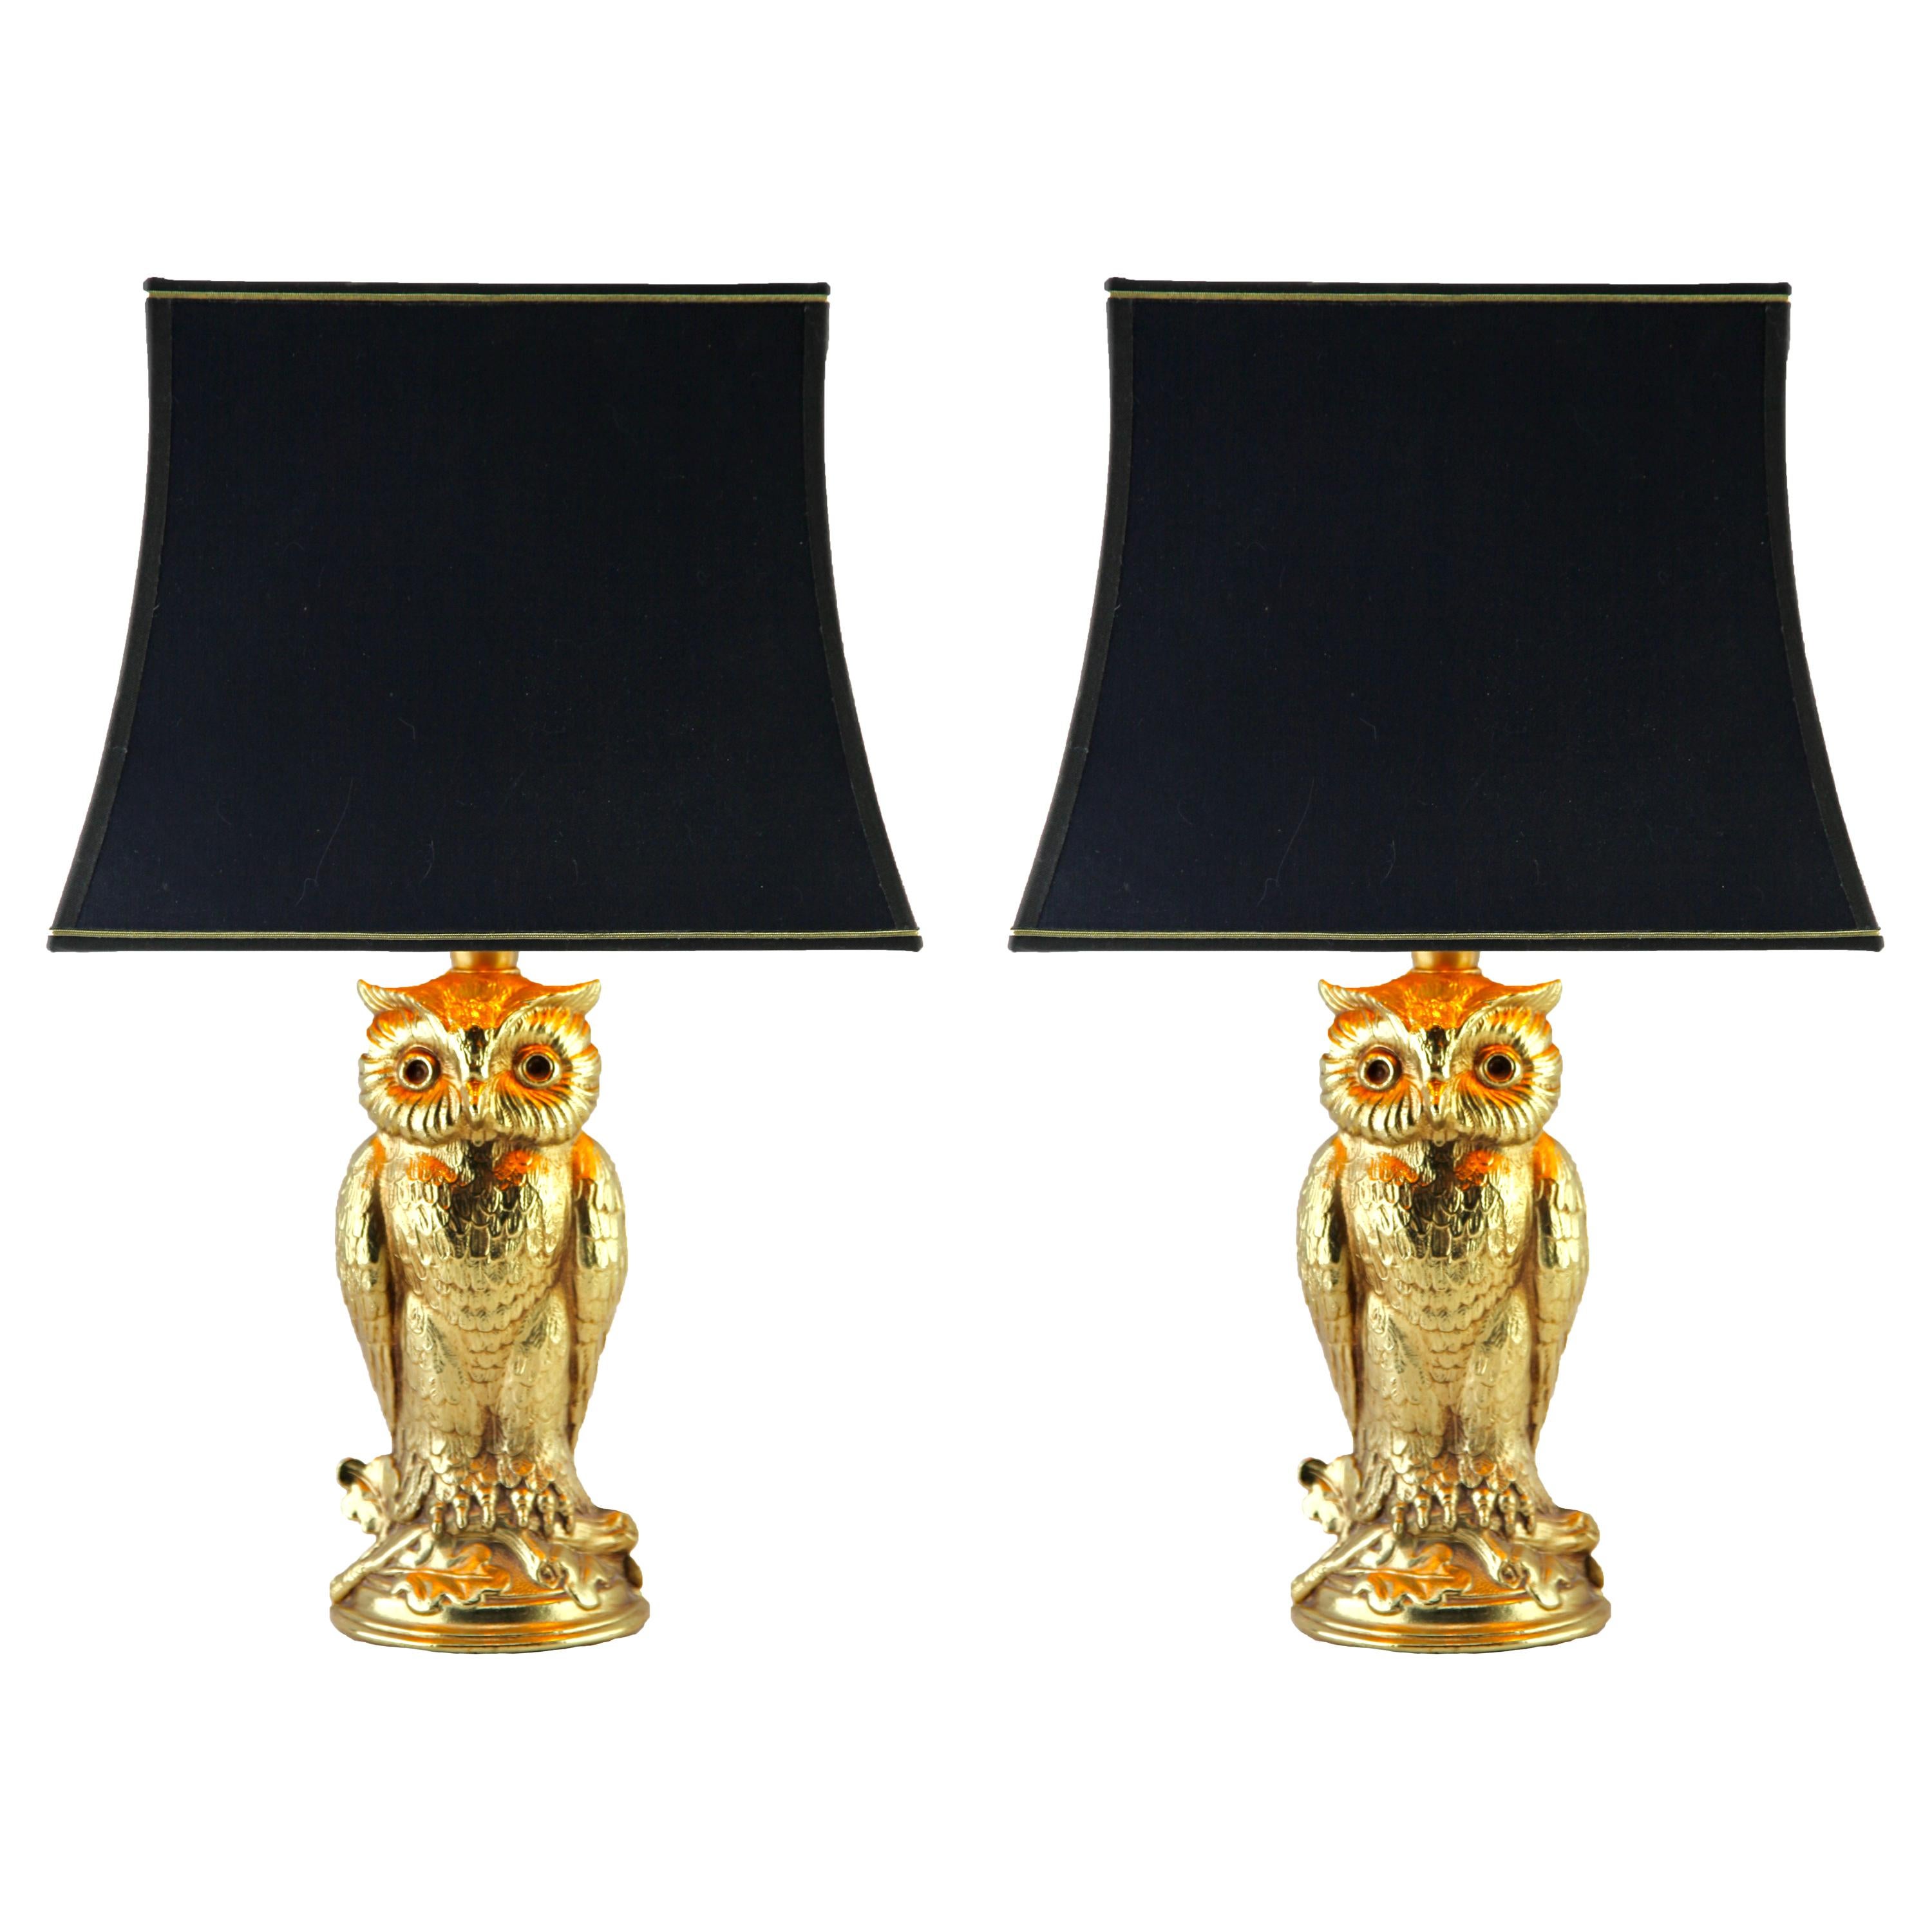 Brass Pair of Owl Table Lamps from Loevsky & Loevsky, 1960s For Sale